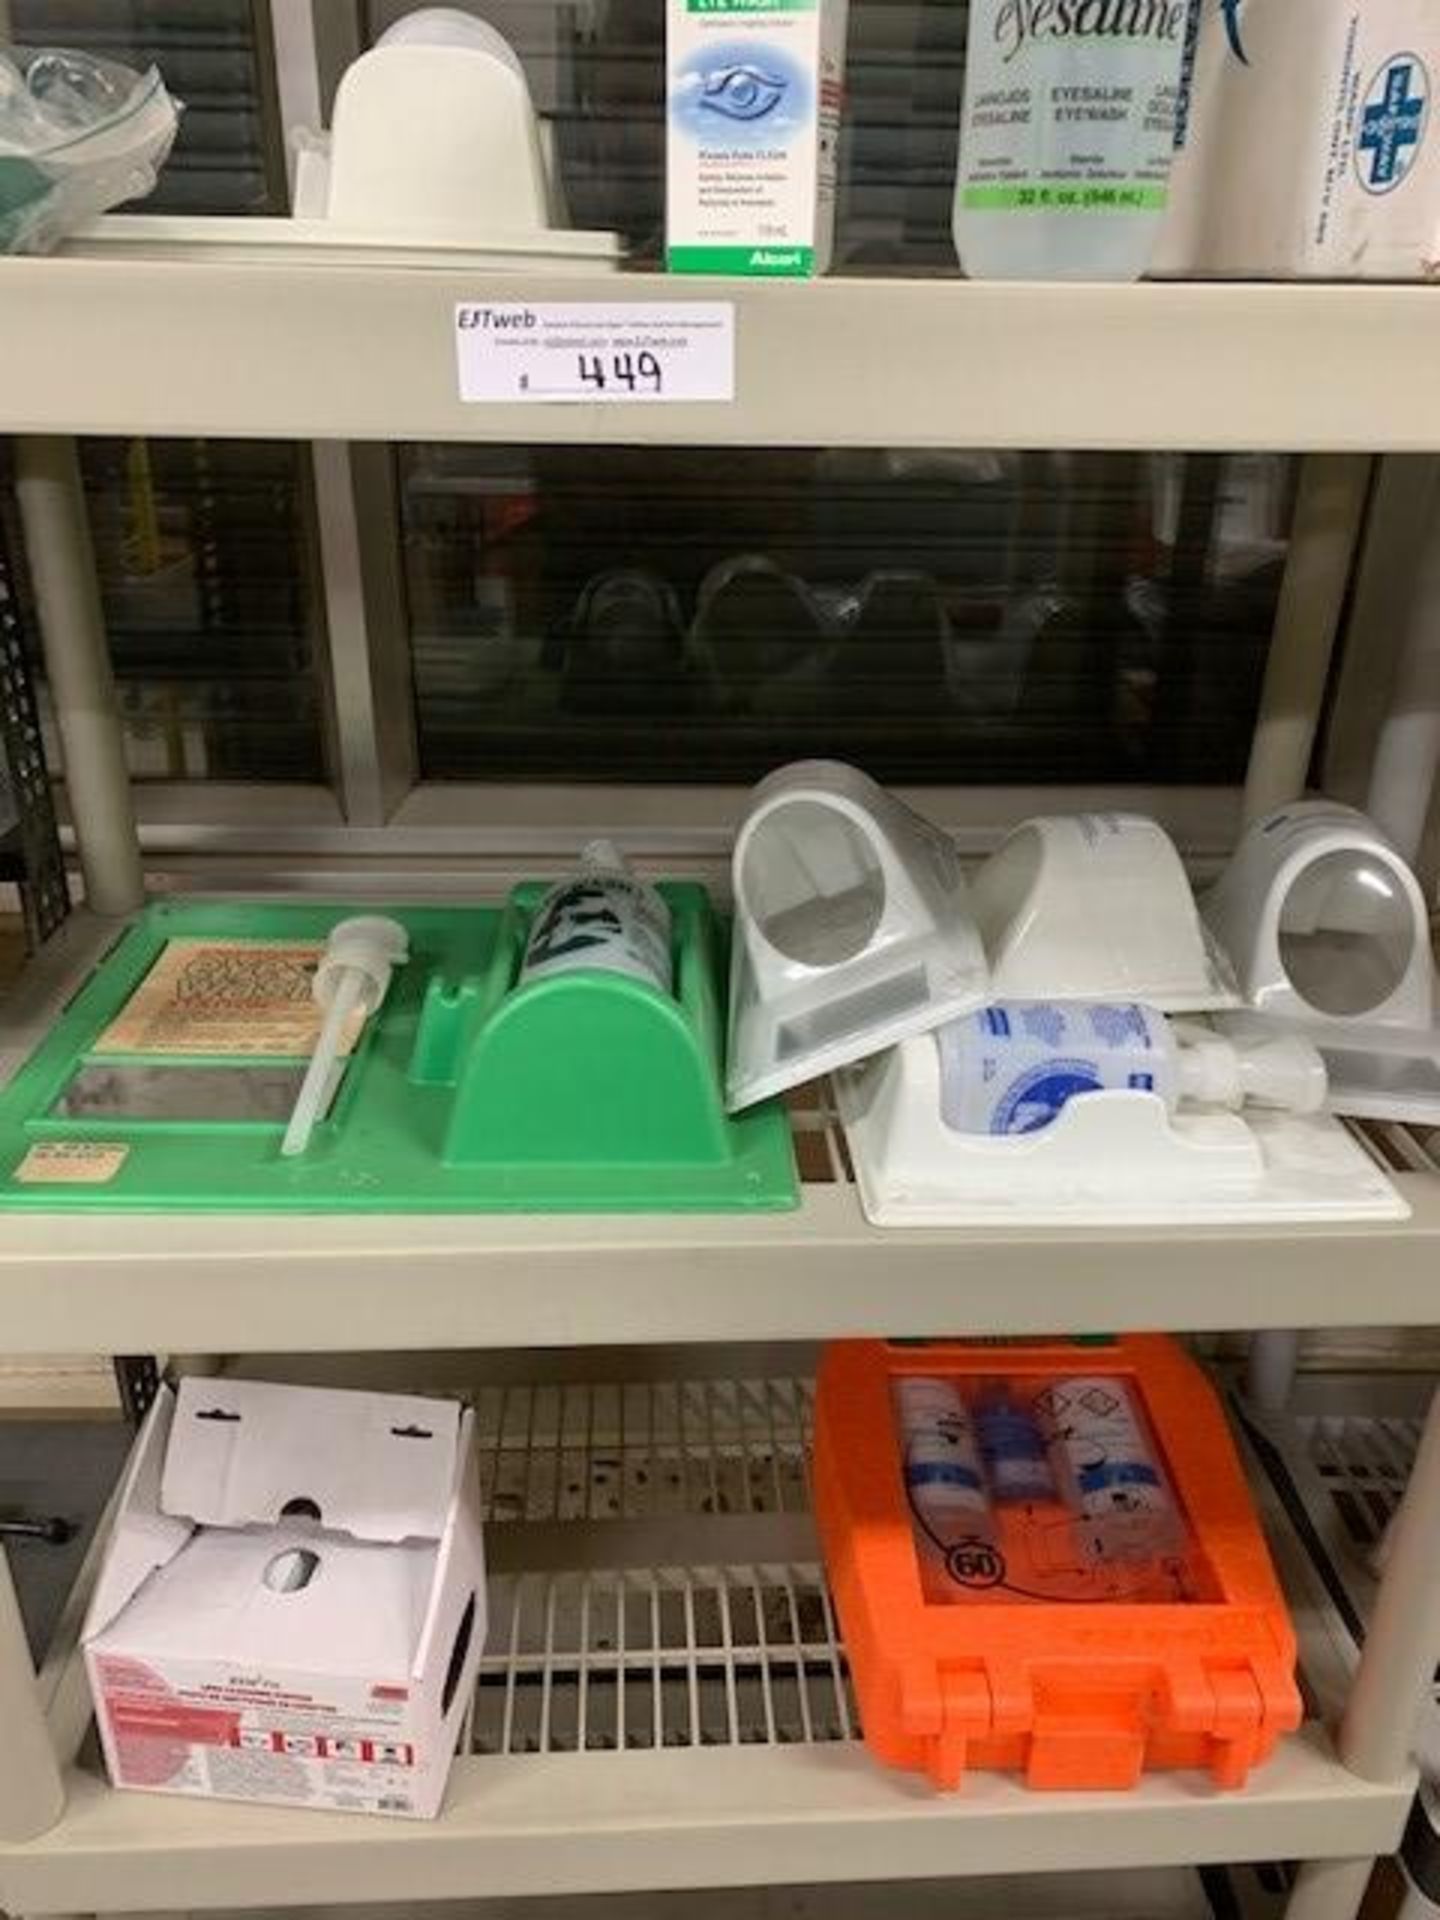 LOT: Contents on rack: Asst. Security & Eye Care Items